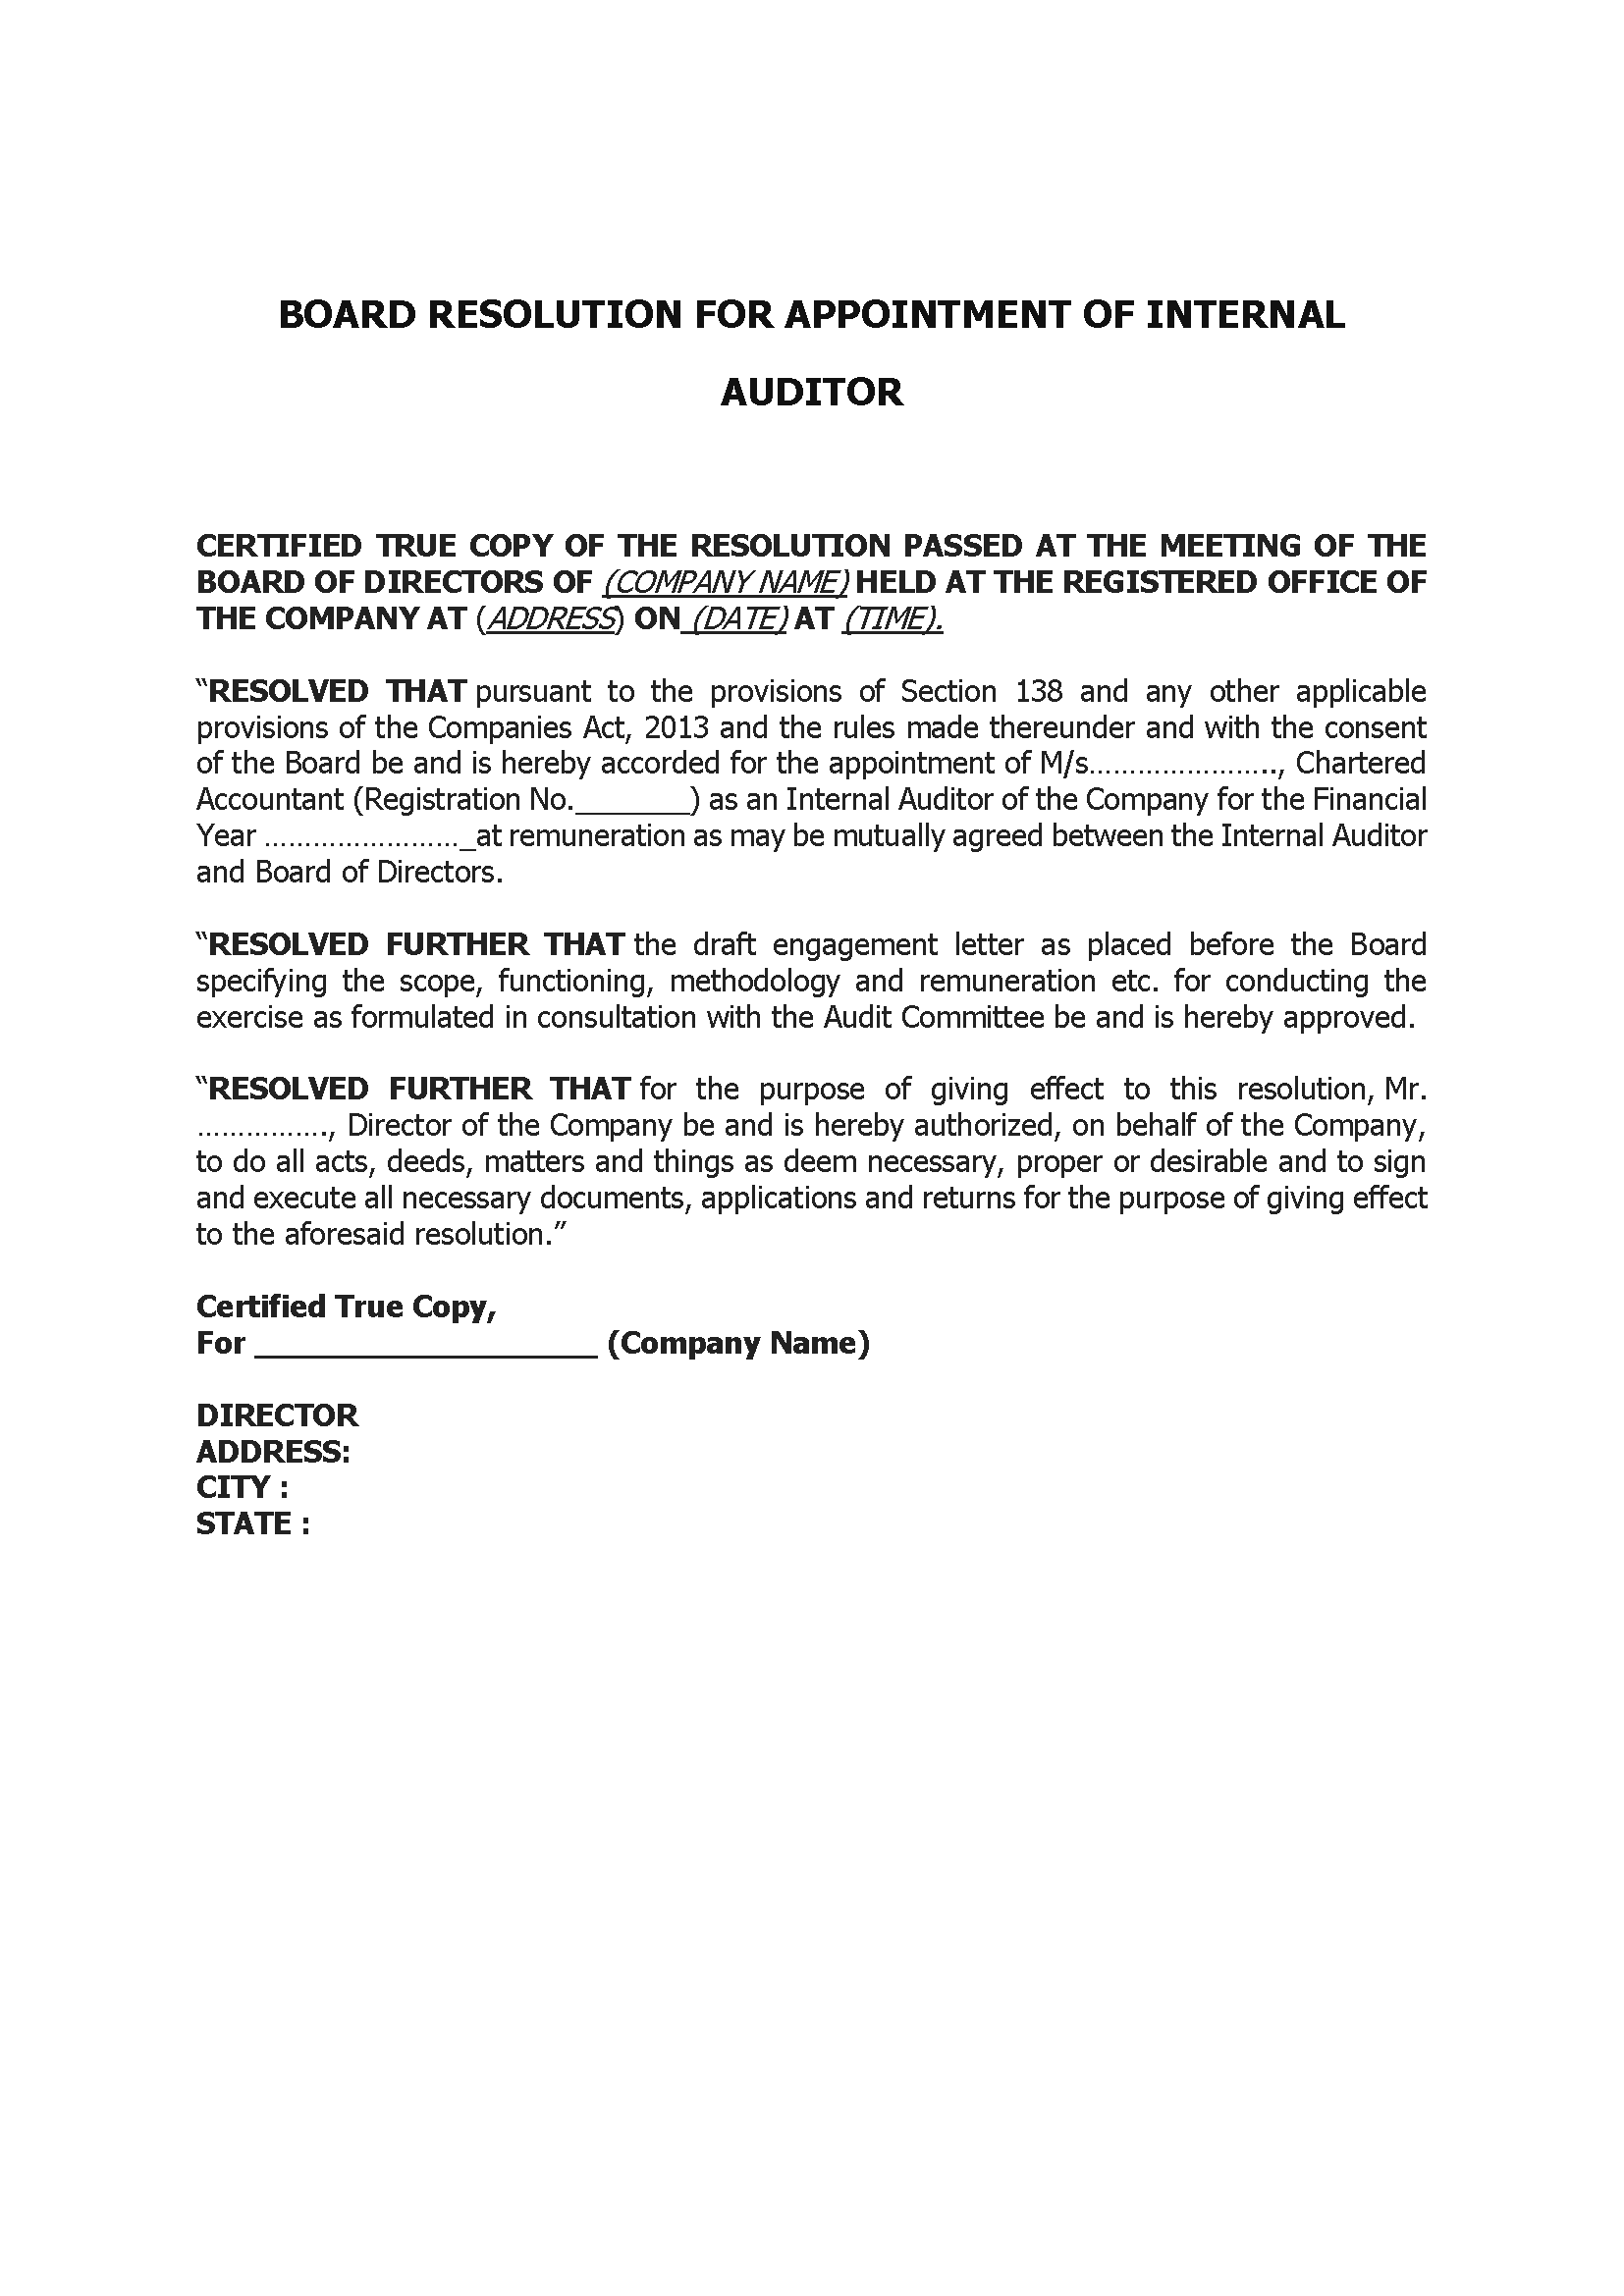 Board Resolution For Appointment Of Internal Auditor